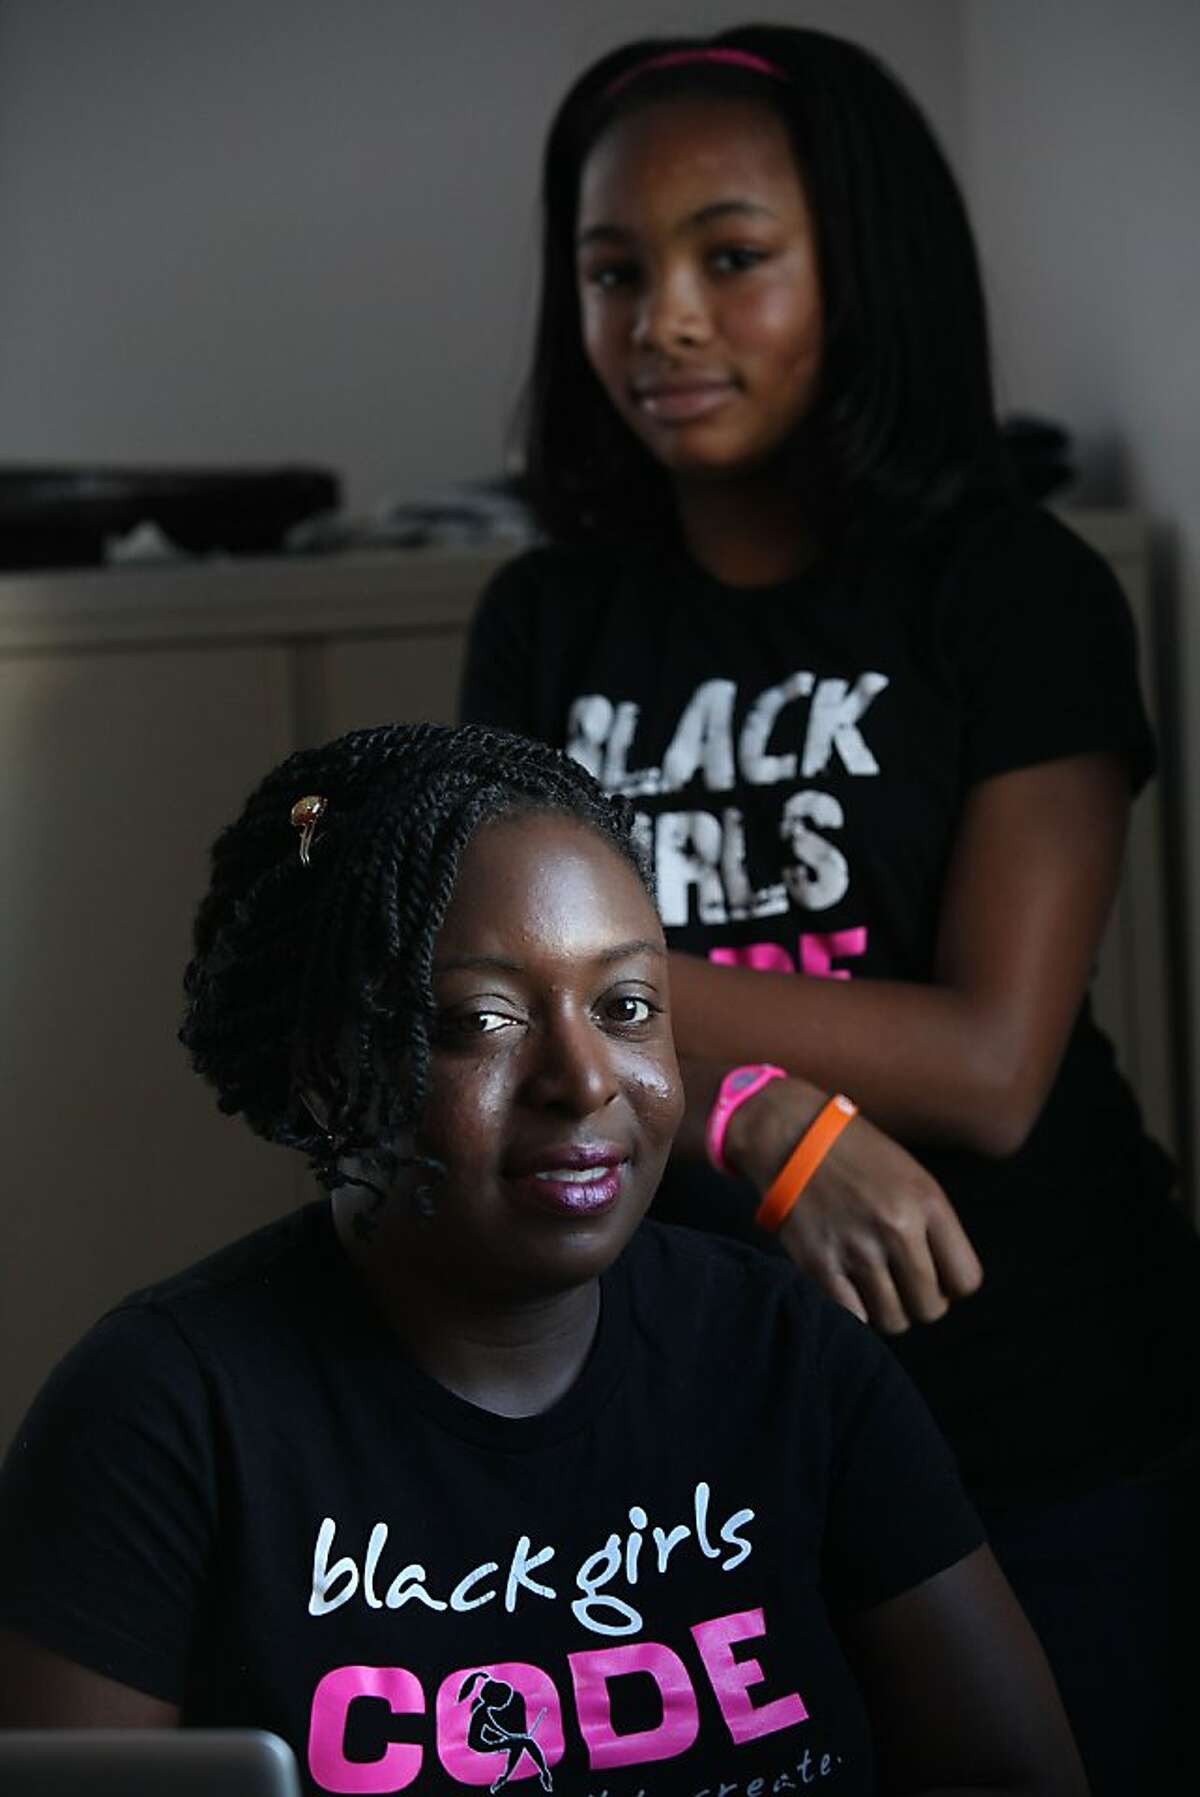 Kimberly Bryant and her daughter Kai Bryant, 13 years old, at ThoughtWorks, one of their sponsors, in San Francisco, Calif., on Thursday, August 23, 2012. Kimberly founded Black Girls Code encouraging girls of color to learn about computer science and technology.